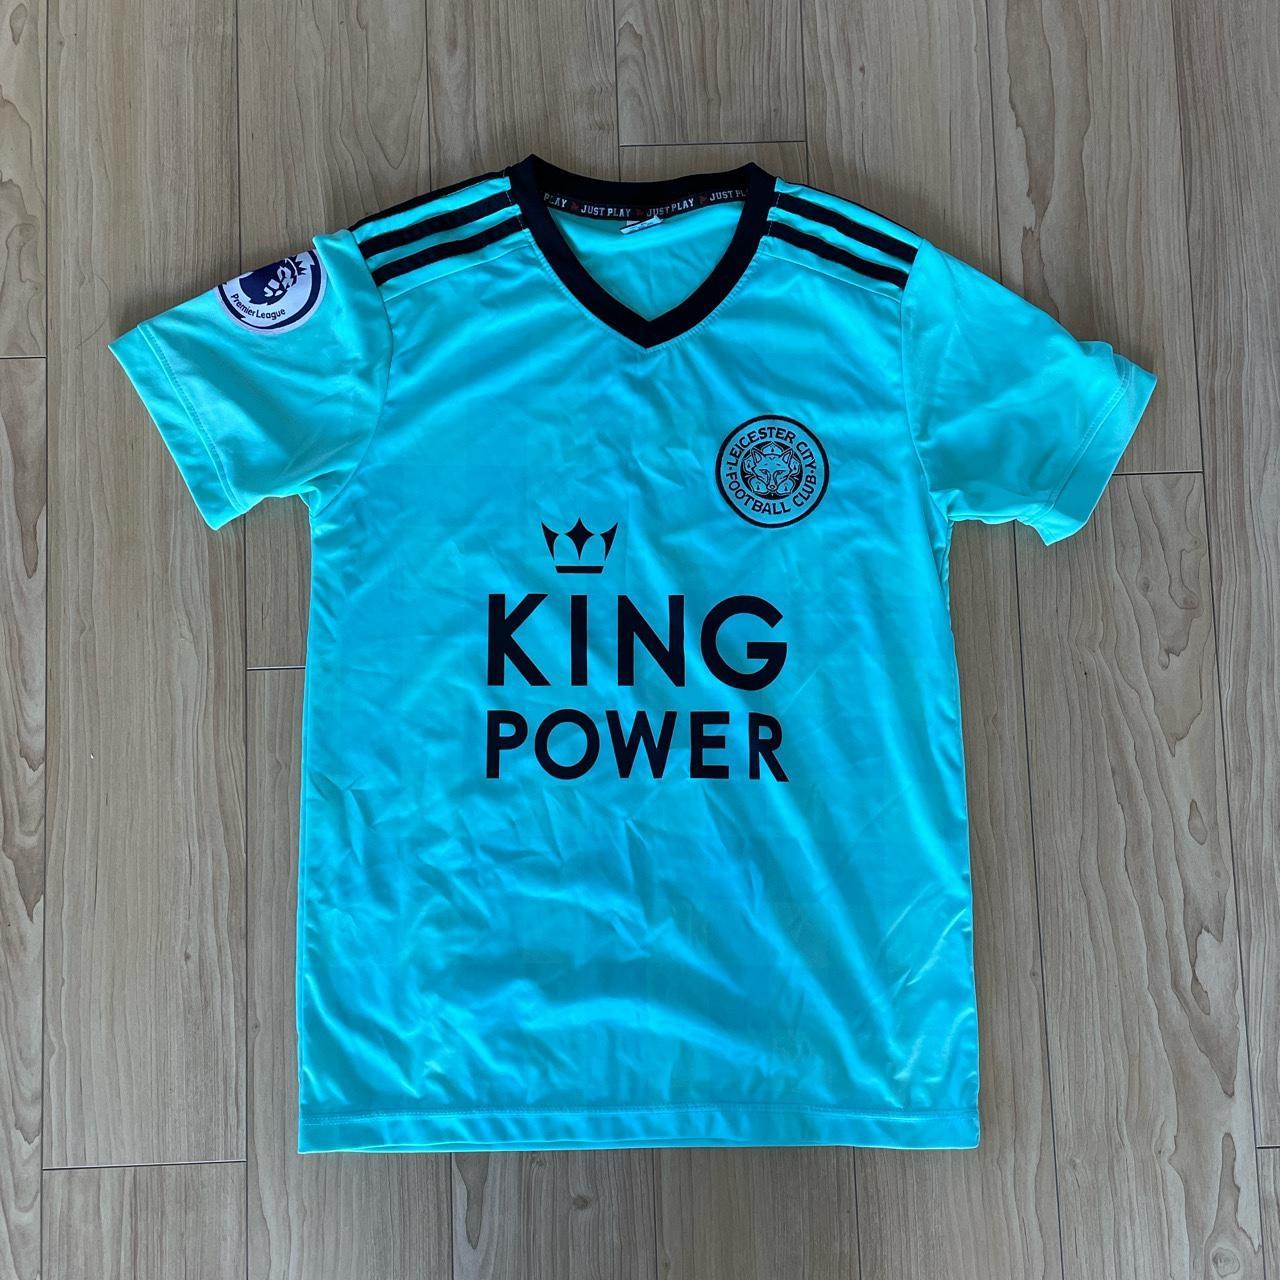 Leicester City 2021/22 adidas Third Kit: Buy Now!